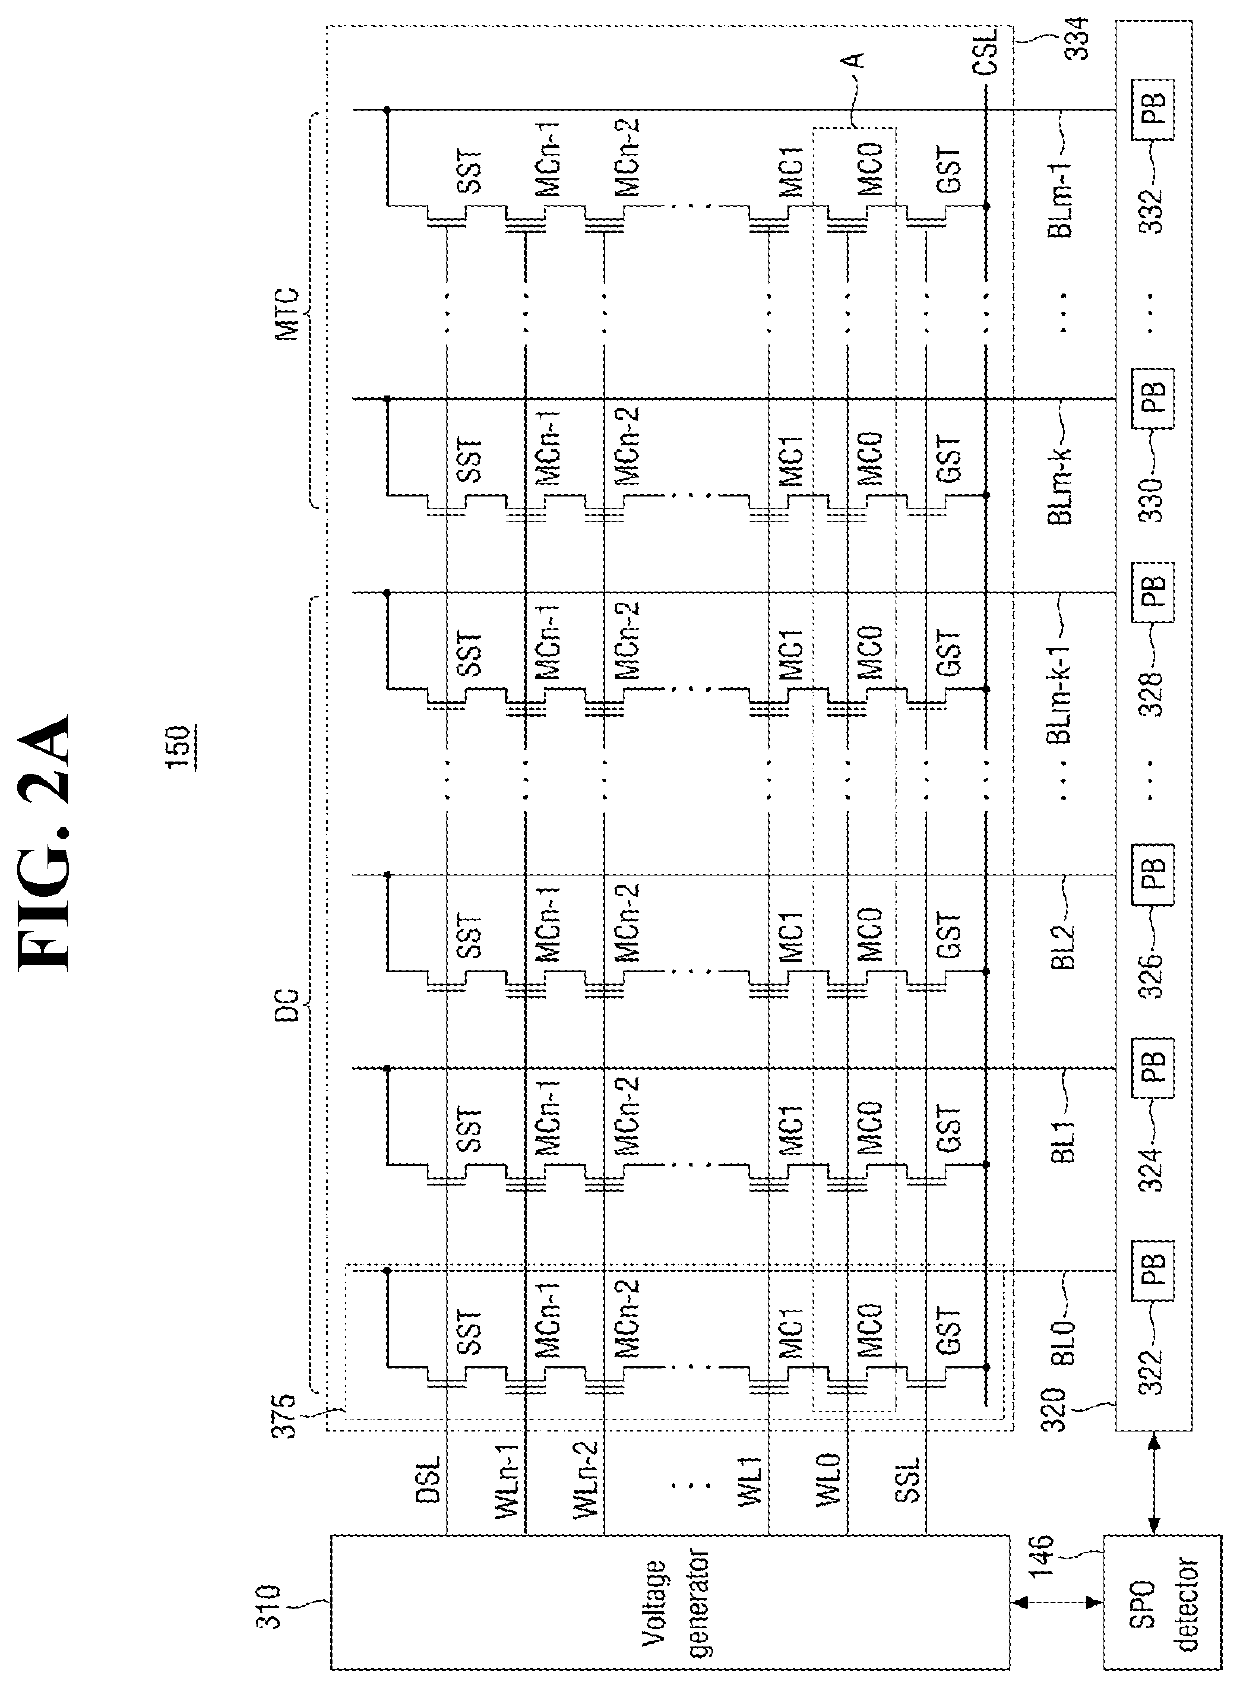 Nonvolatile memory device and method of programing with capability of detecting sudden power off